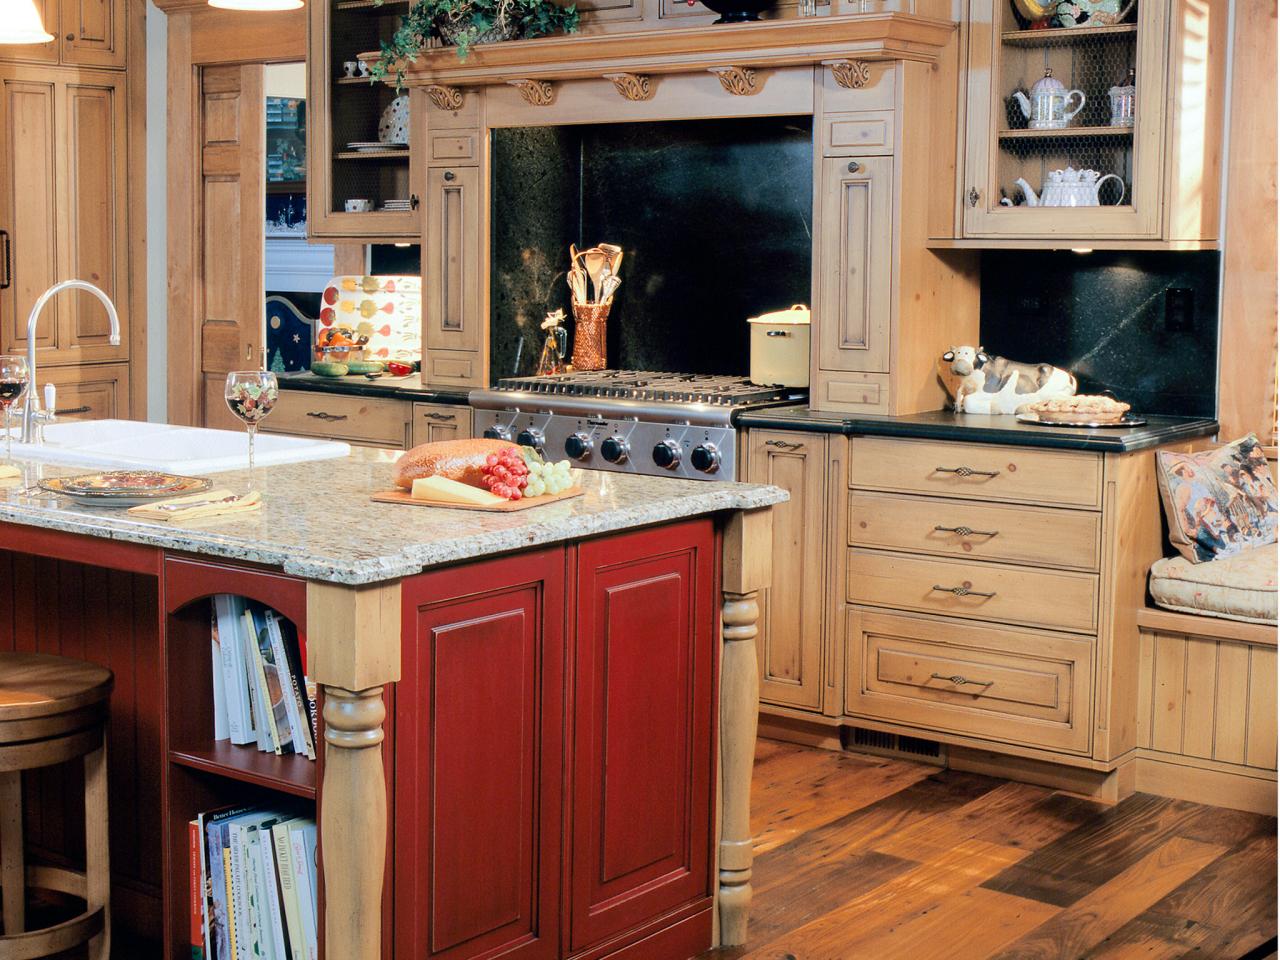 Staining Kitchen Cabinets Pictures, How To Paint Stained Birch Cabinets